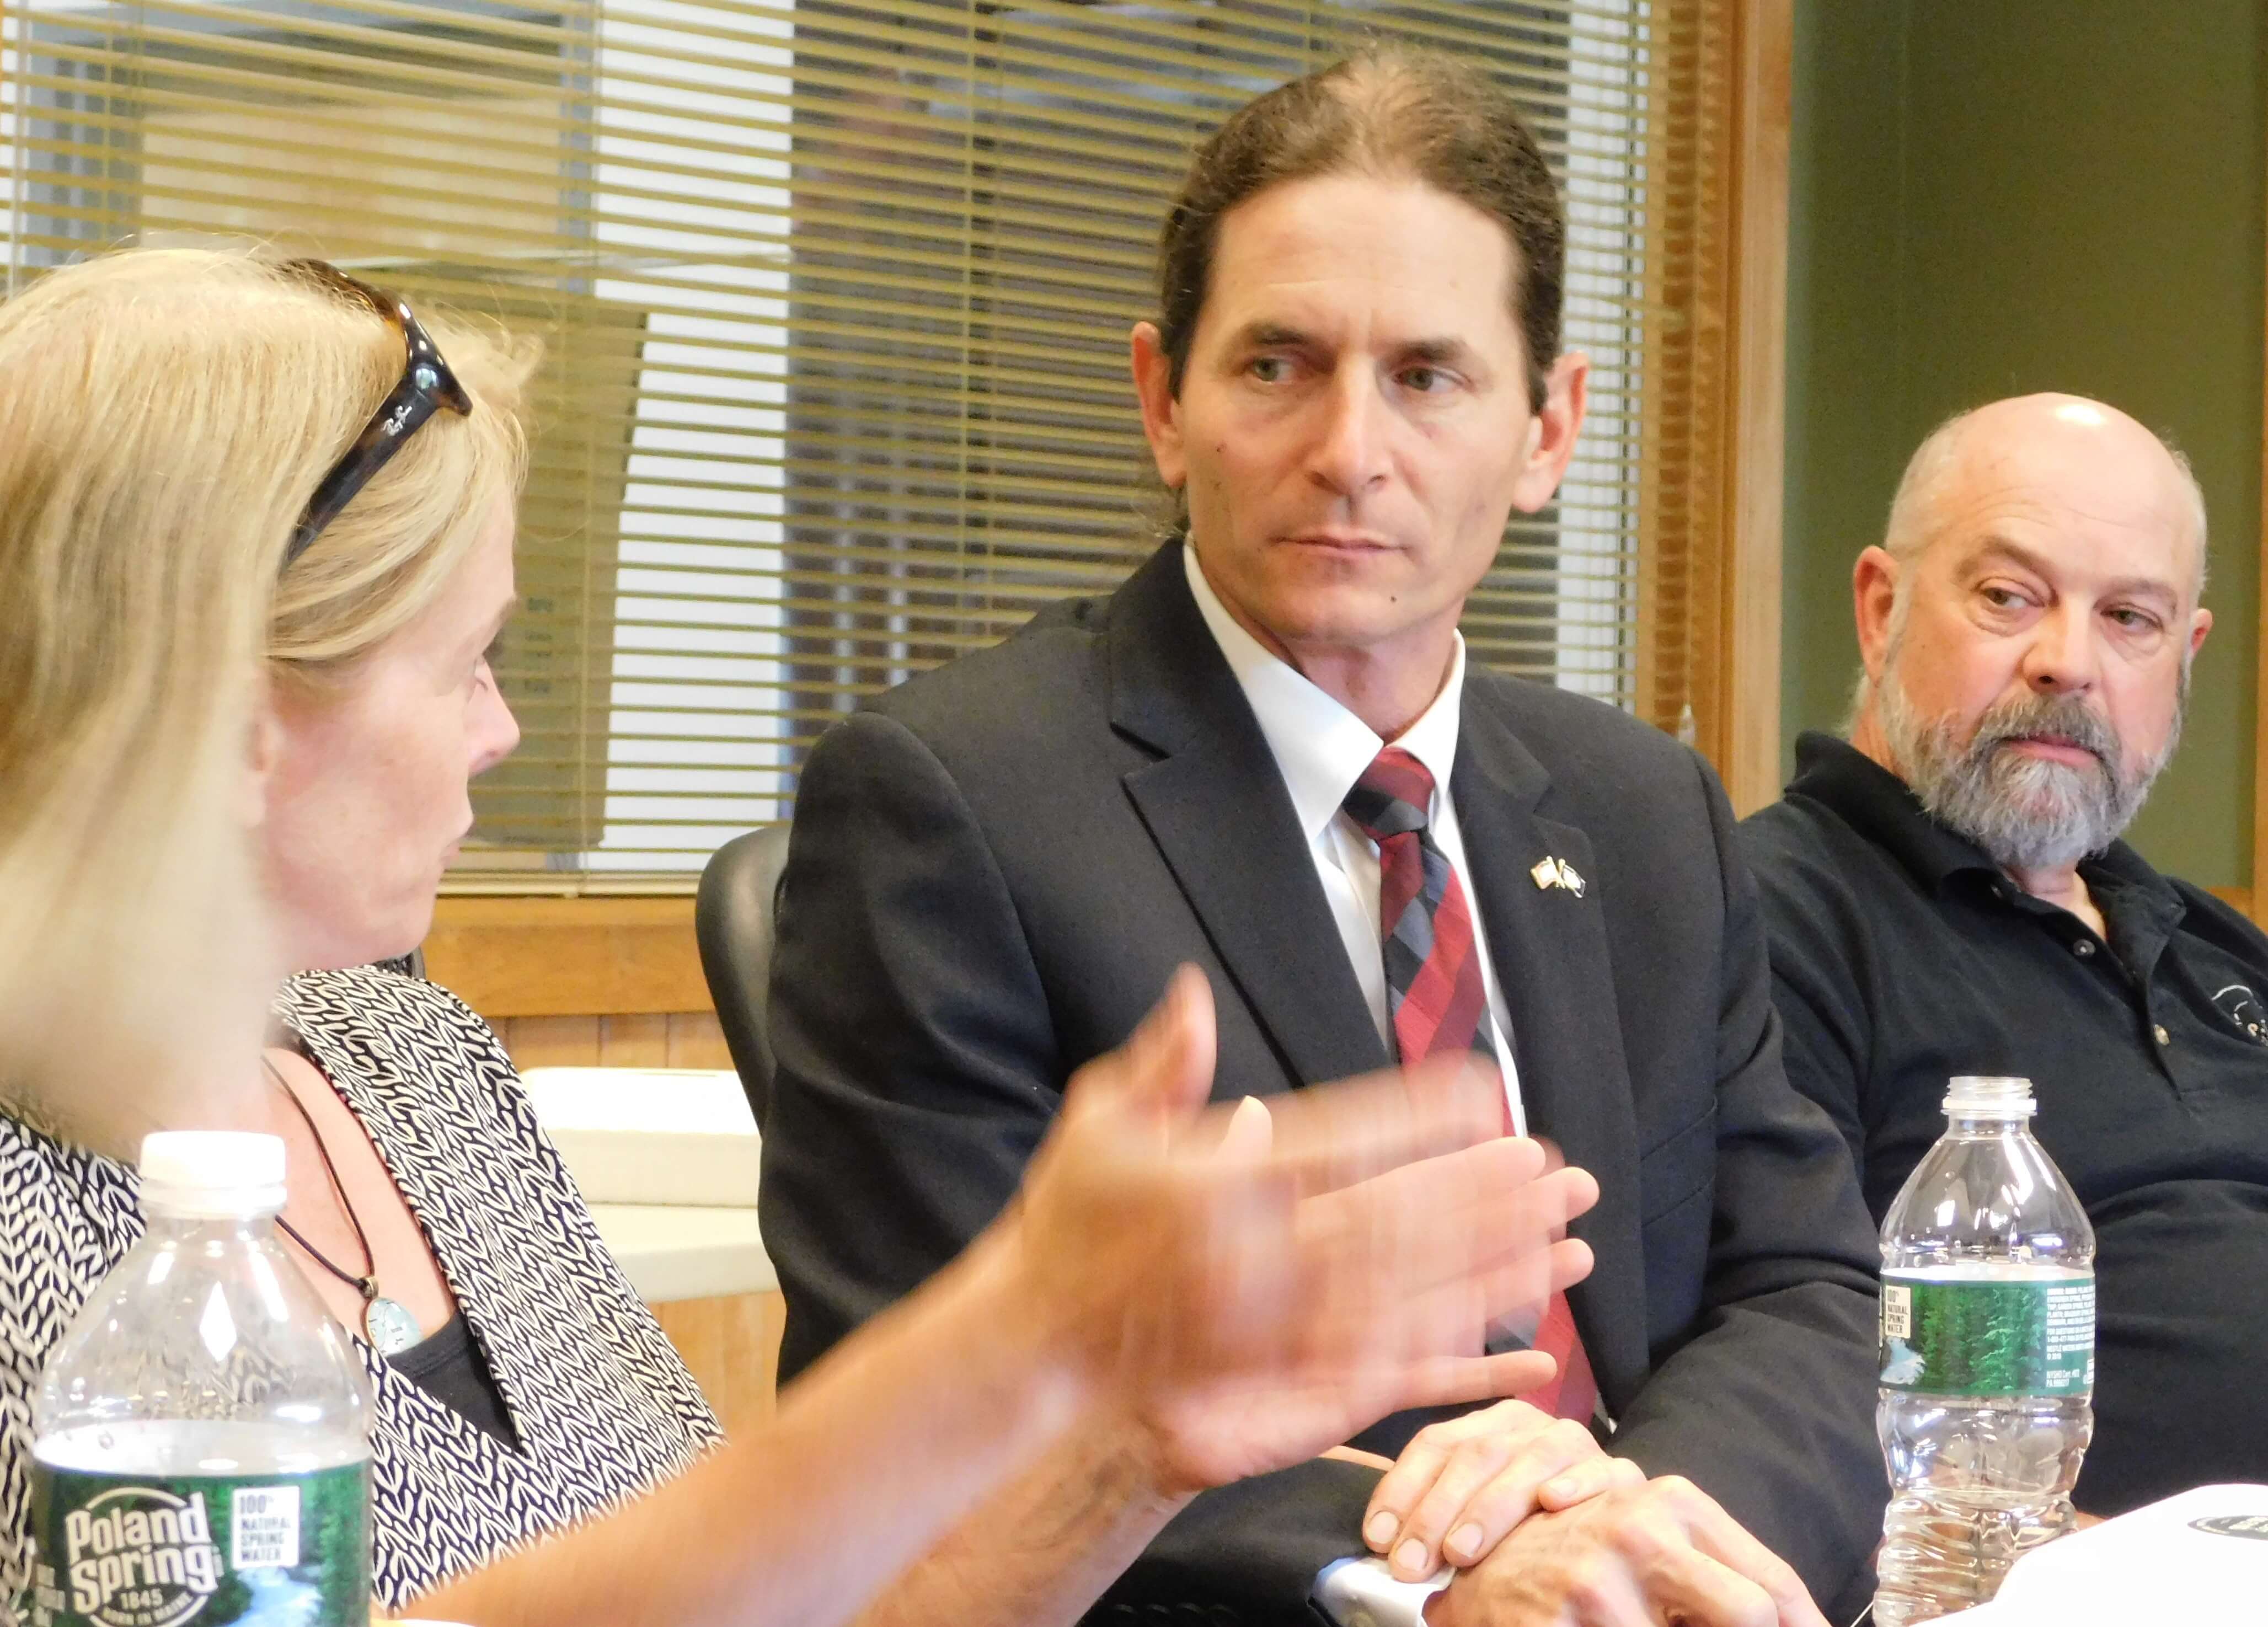 MSI Hosts Business Roundtable with VT Lt. Governor
